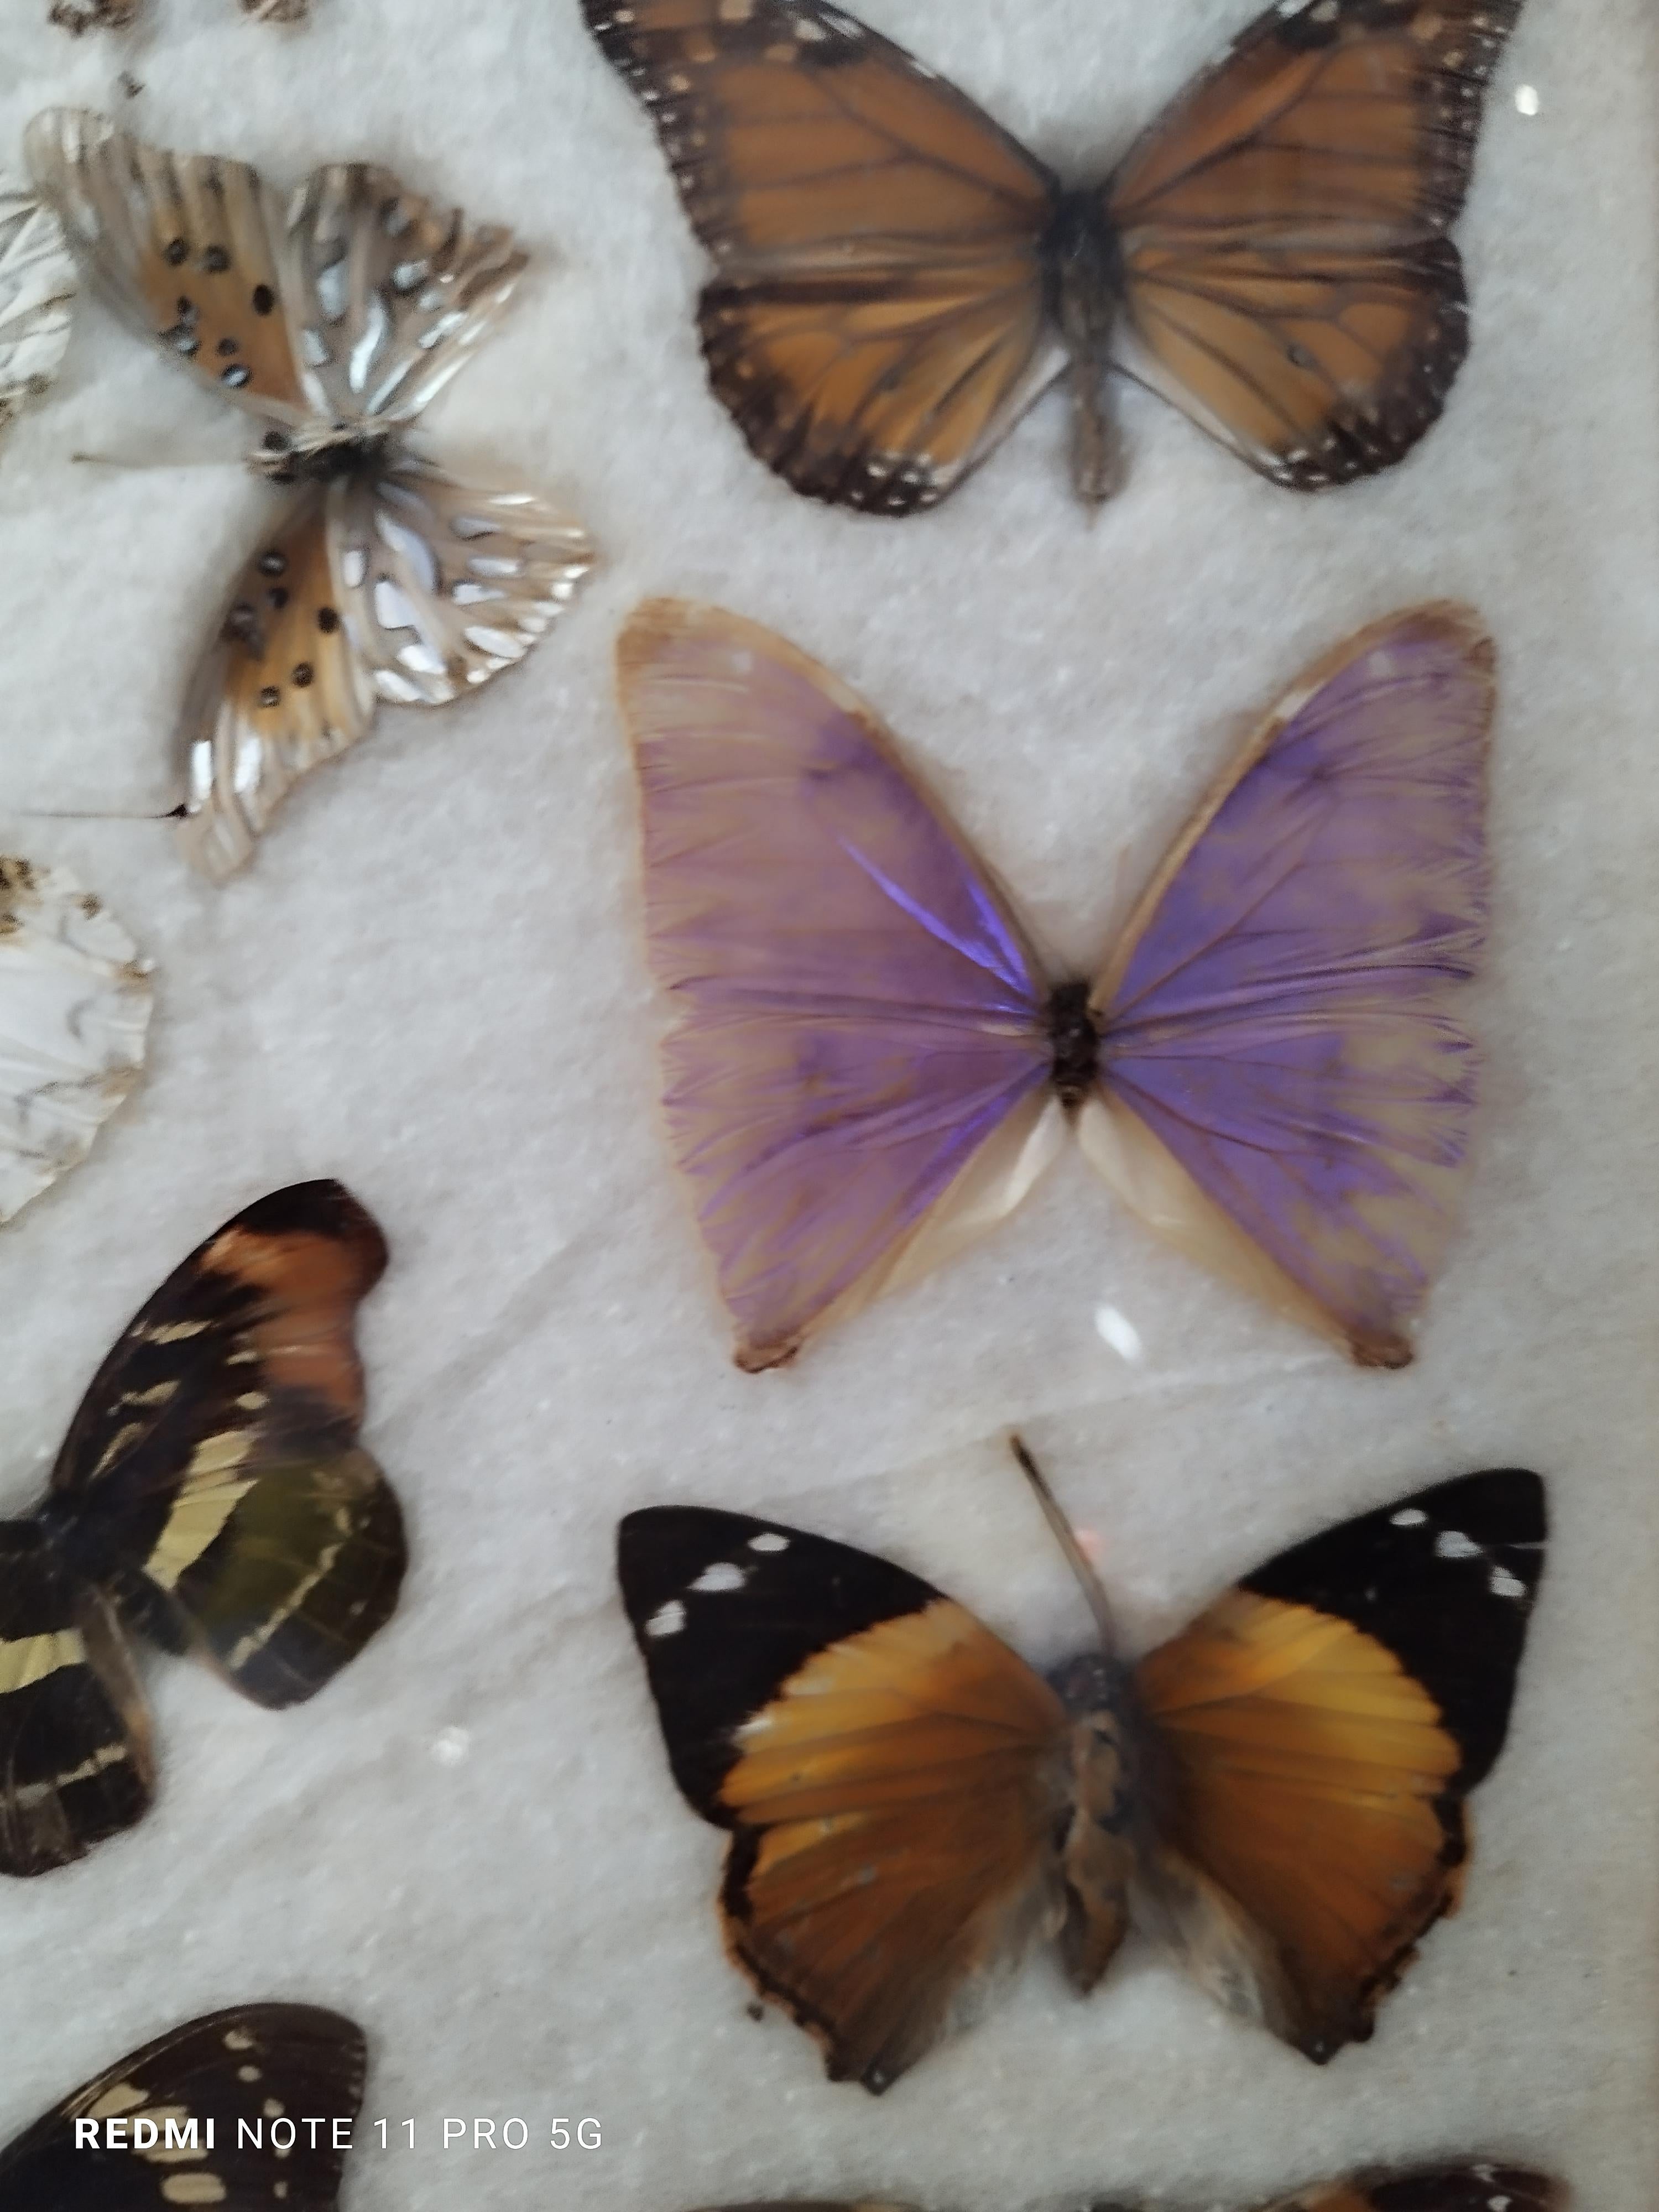 A group of real Brazilian butterflies presented in a beautiful antique wooden box from 1960. These specimens are extremely rare and have been selected from a vintage collection.